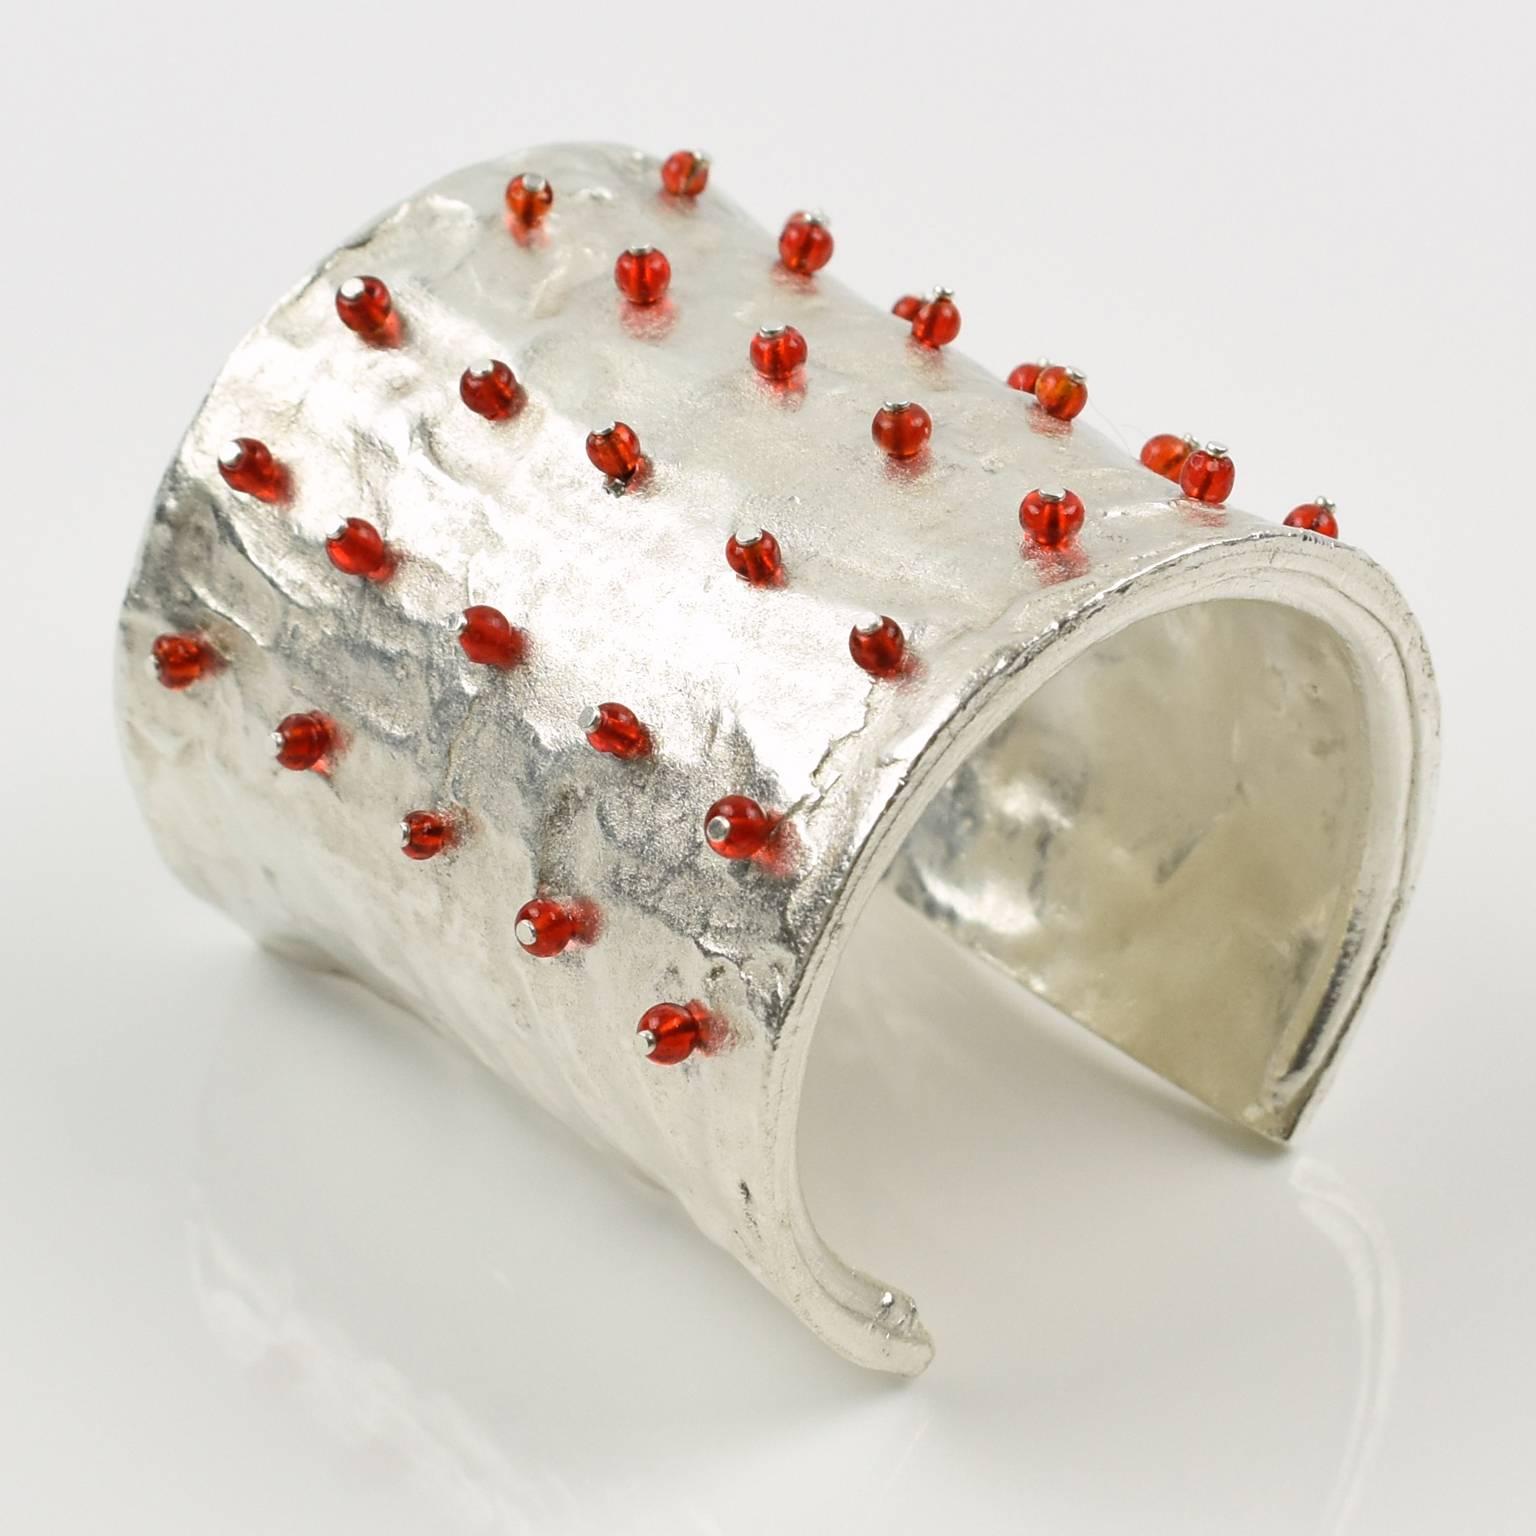 Stunning modernist silver plate cuff slave bracelet by Nelly Biche de Bere Paris. Chunky massive oversized bangle with brutalist carved and hand-made feel design, topped with tiny ruby red glass beads. Marked in the inside: 'Biche de Bere' and